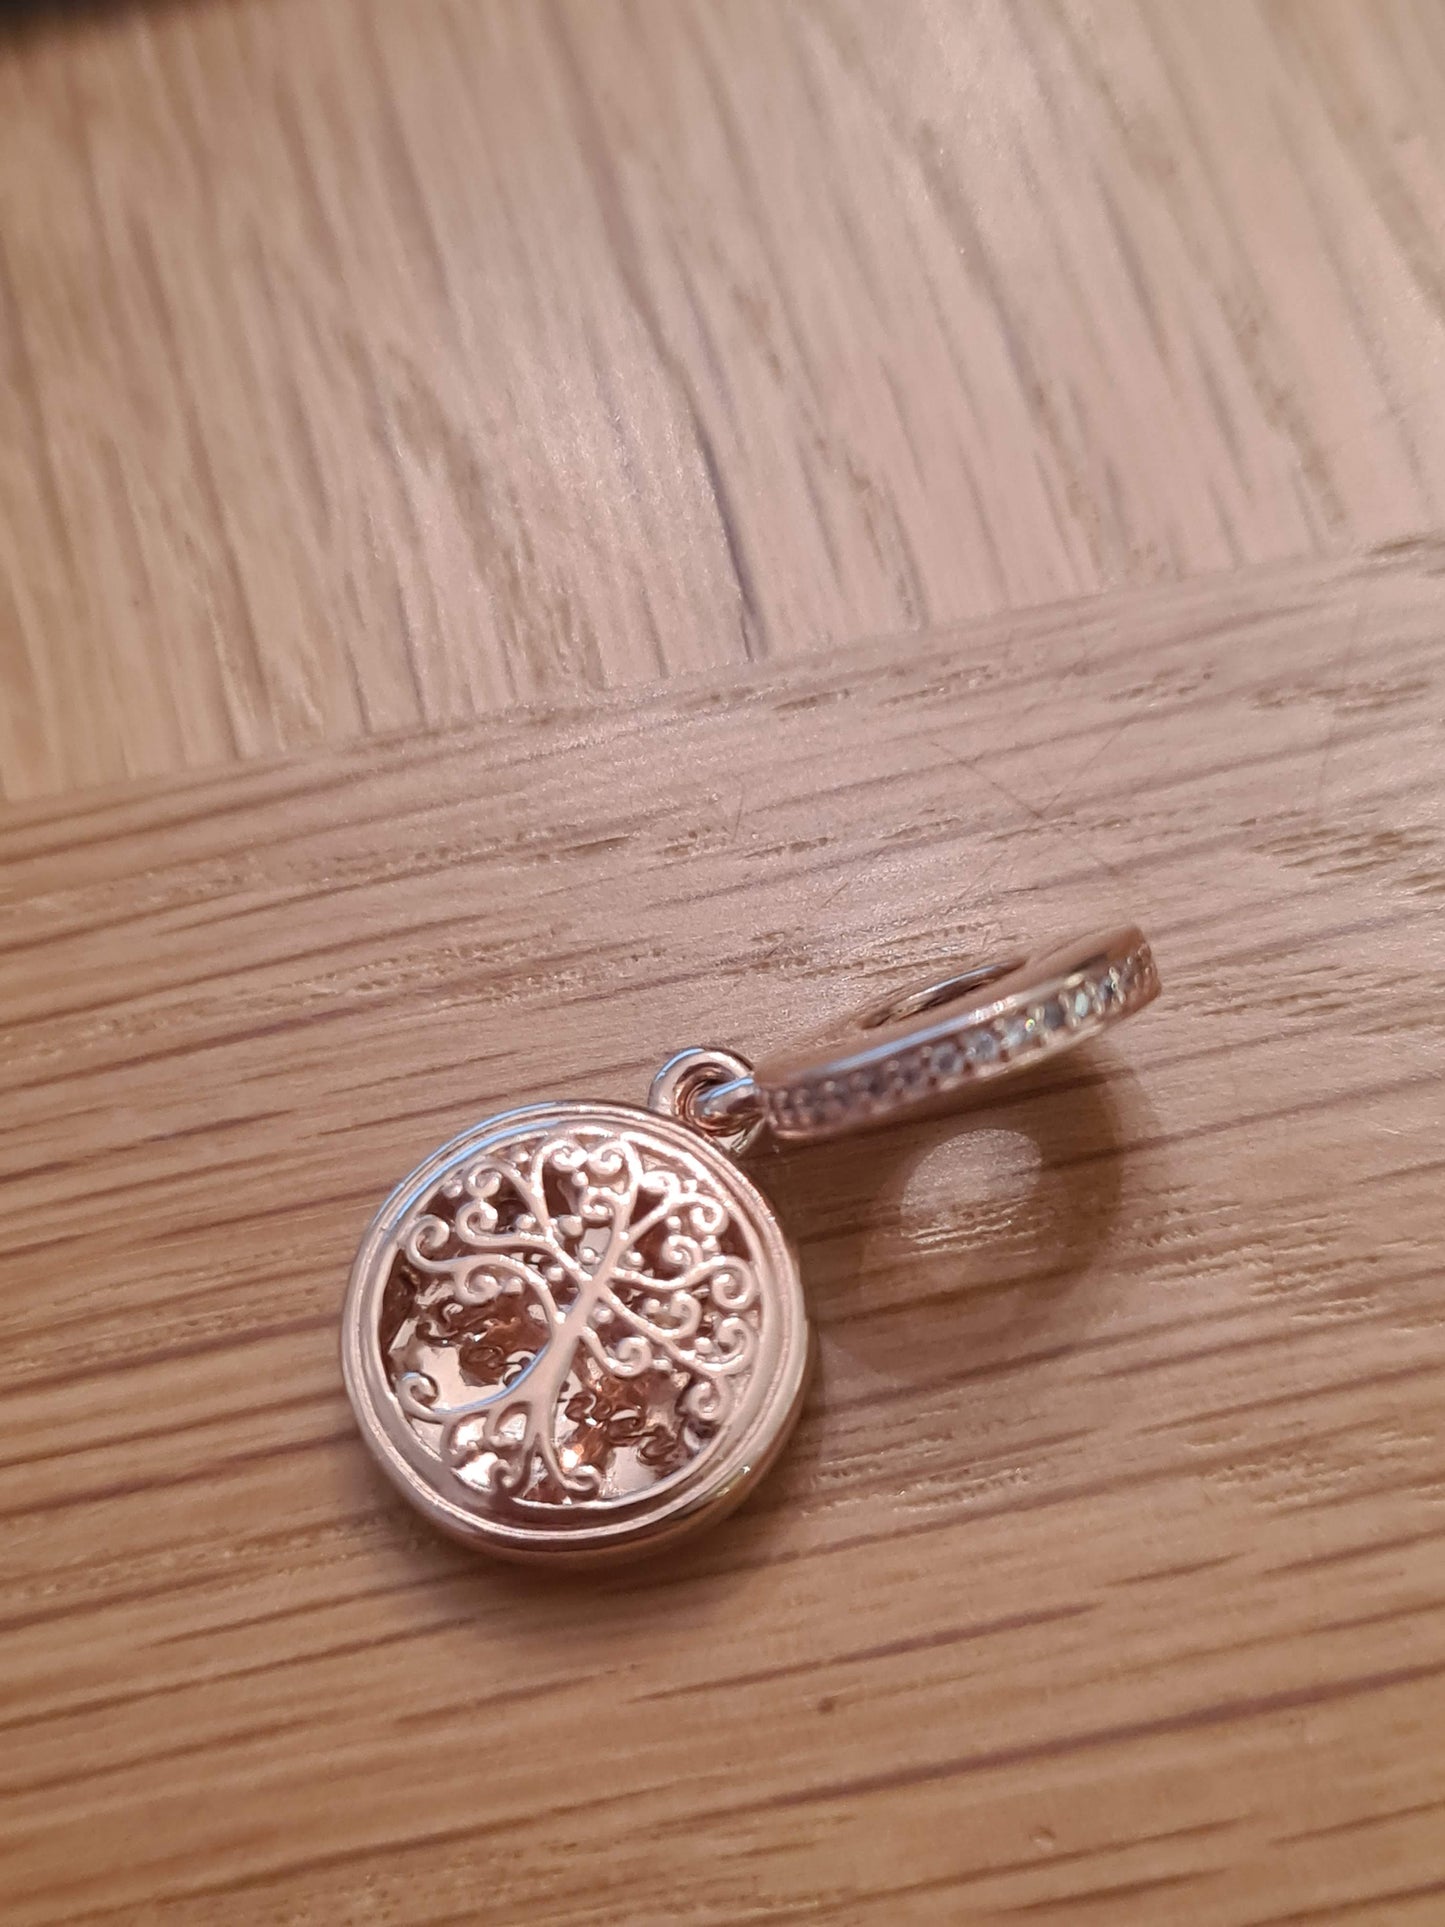 Genuine Pandora Brand New Rose Gold Family Tree Roots Forever Charm Pendant